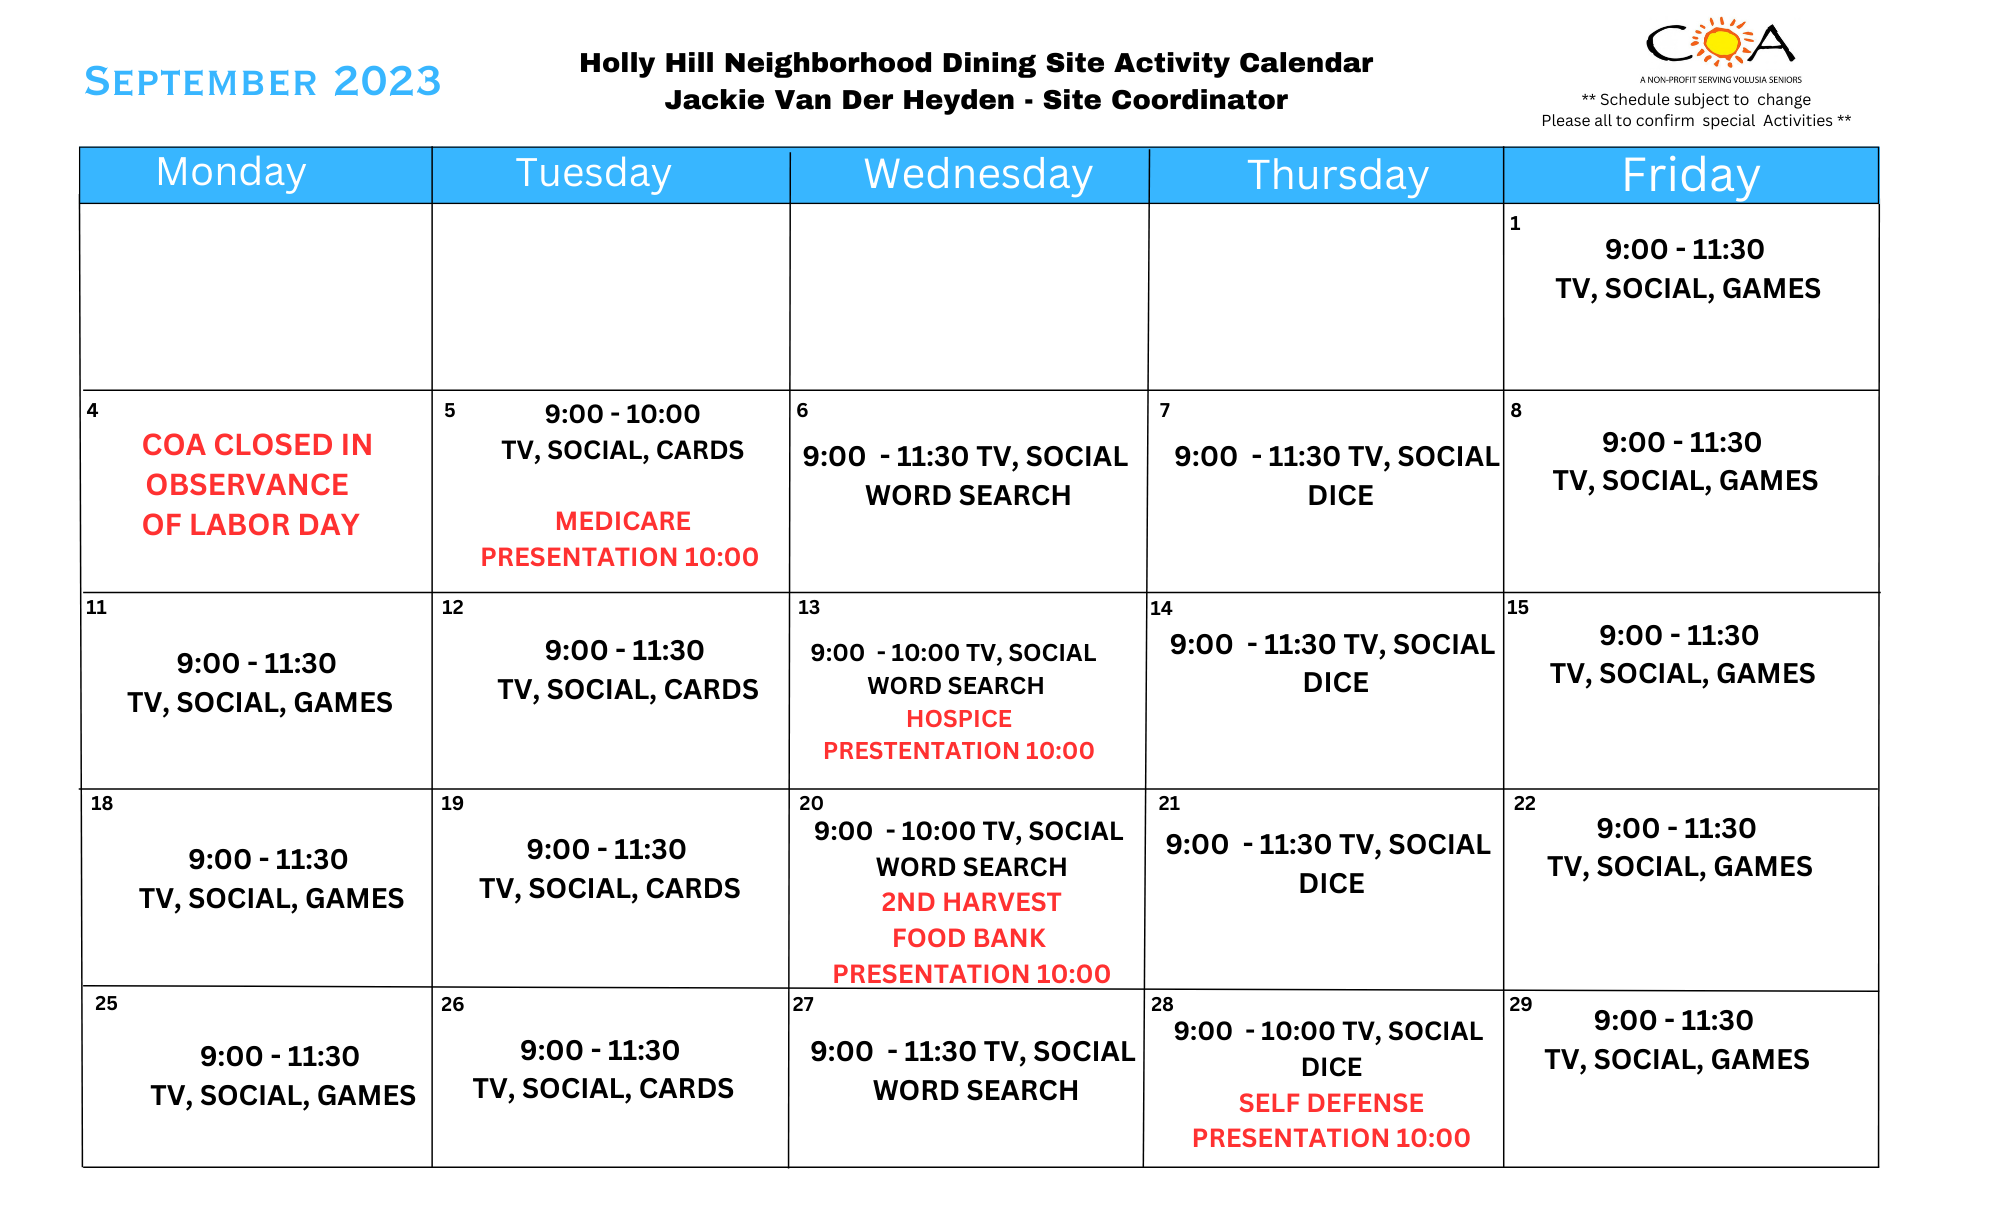 Holly Hill Dining Site Activities Calendar